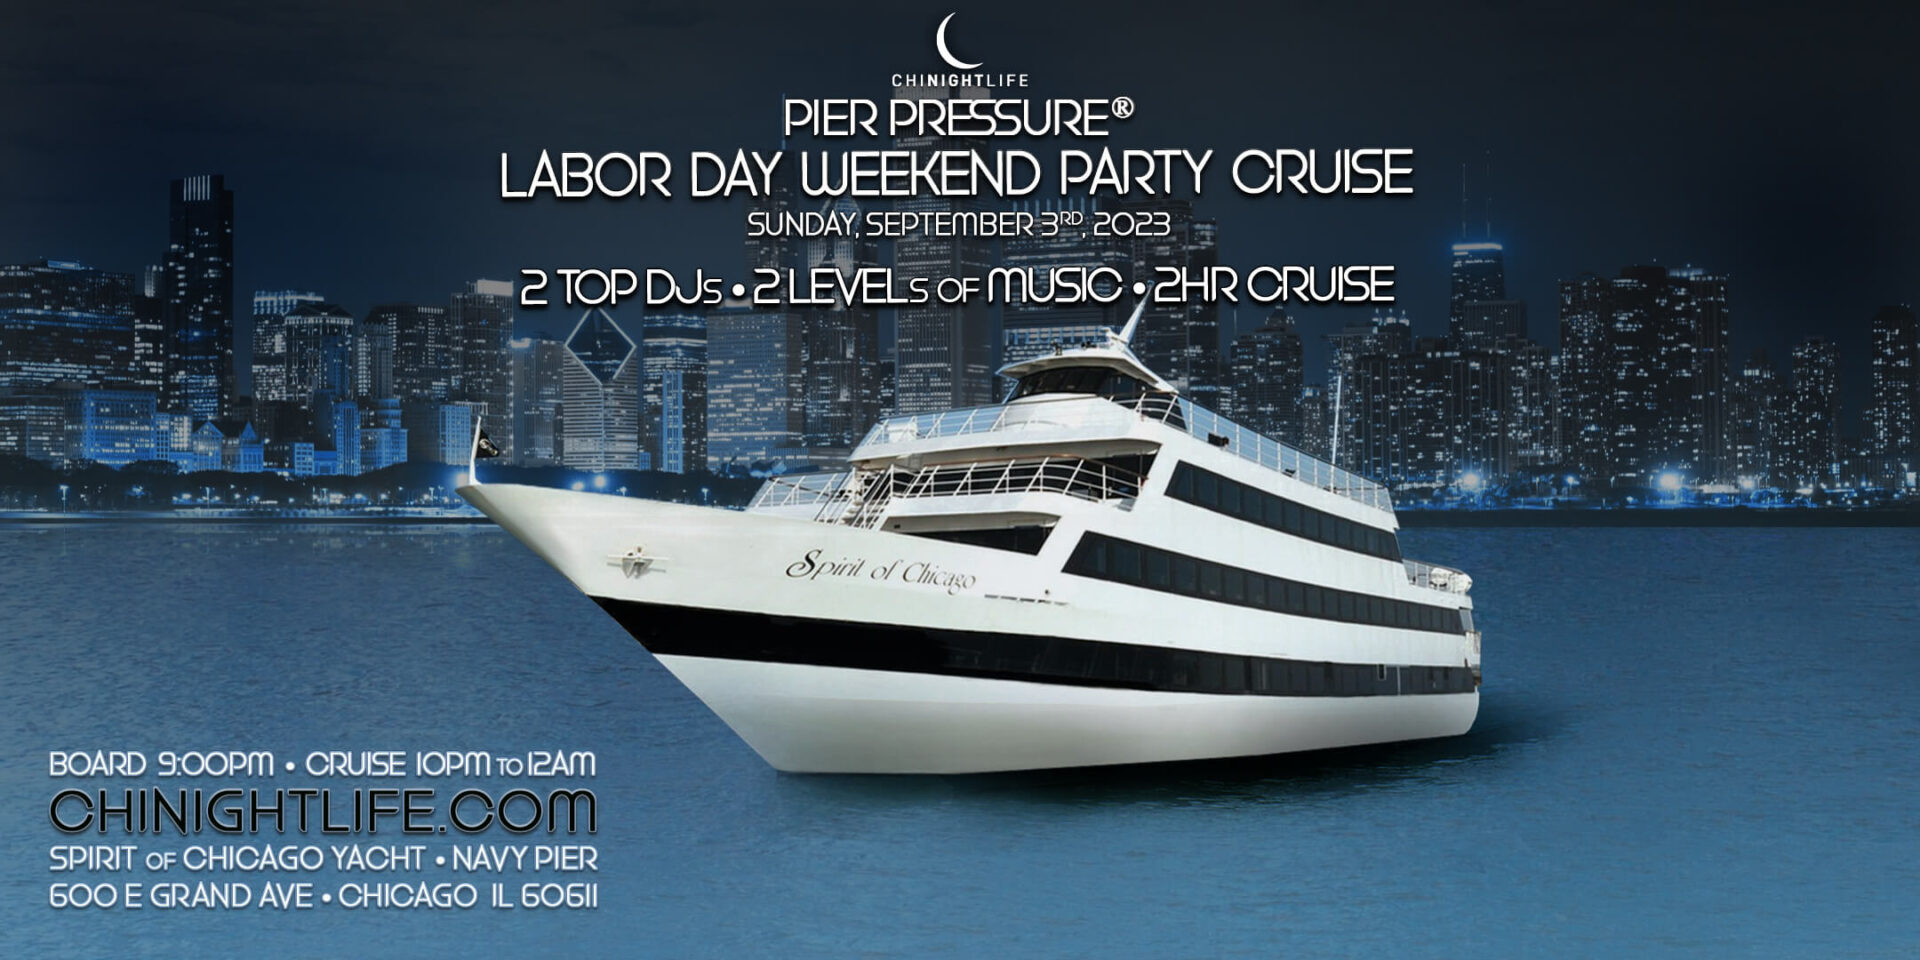 Chicago Labor Day Weekend Pier Pressure Yacht Party Cruise VIP Nightlife